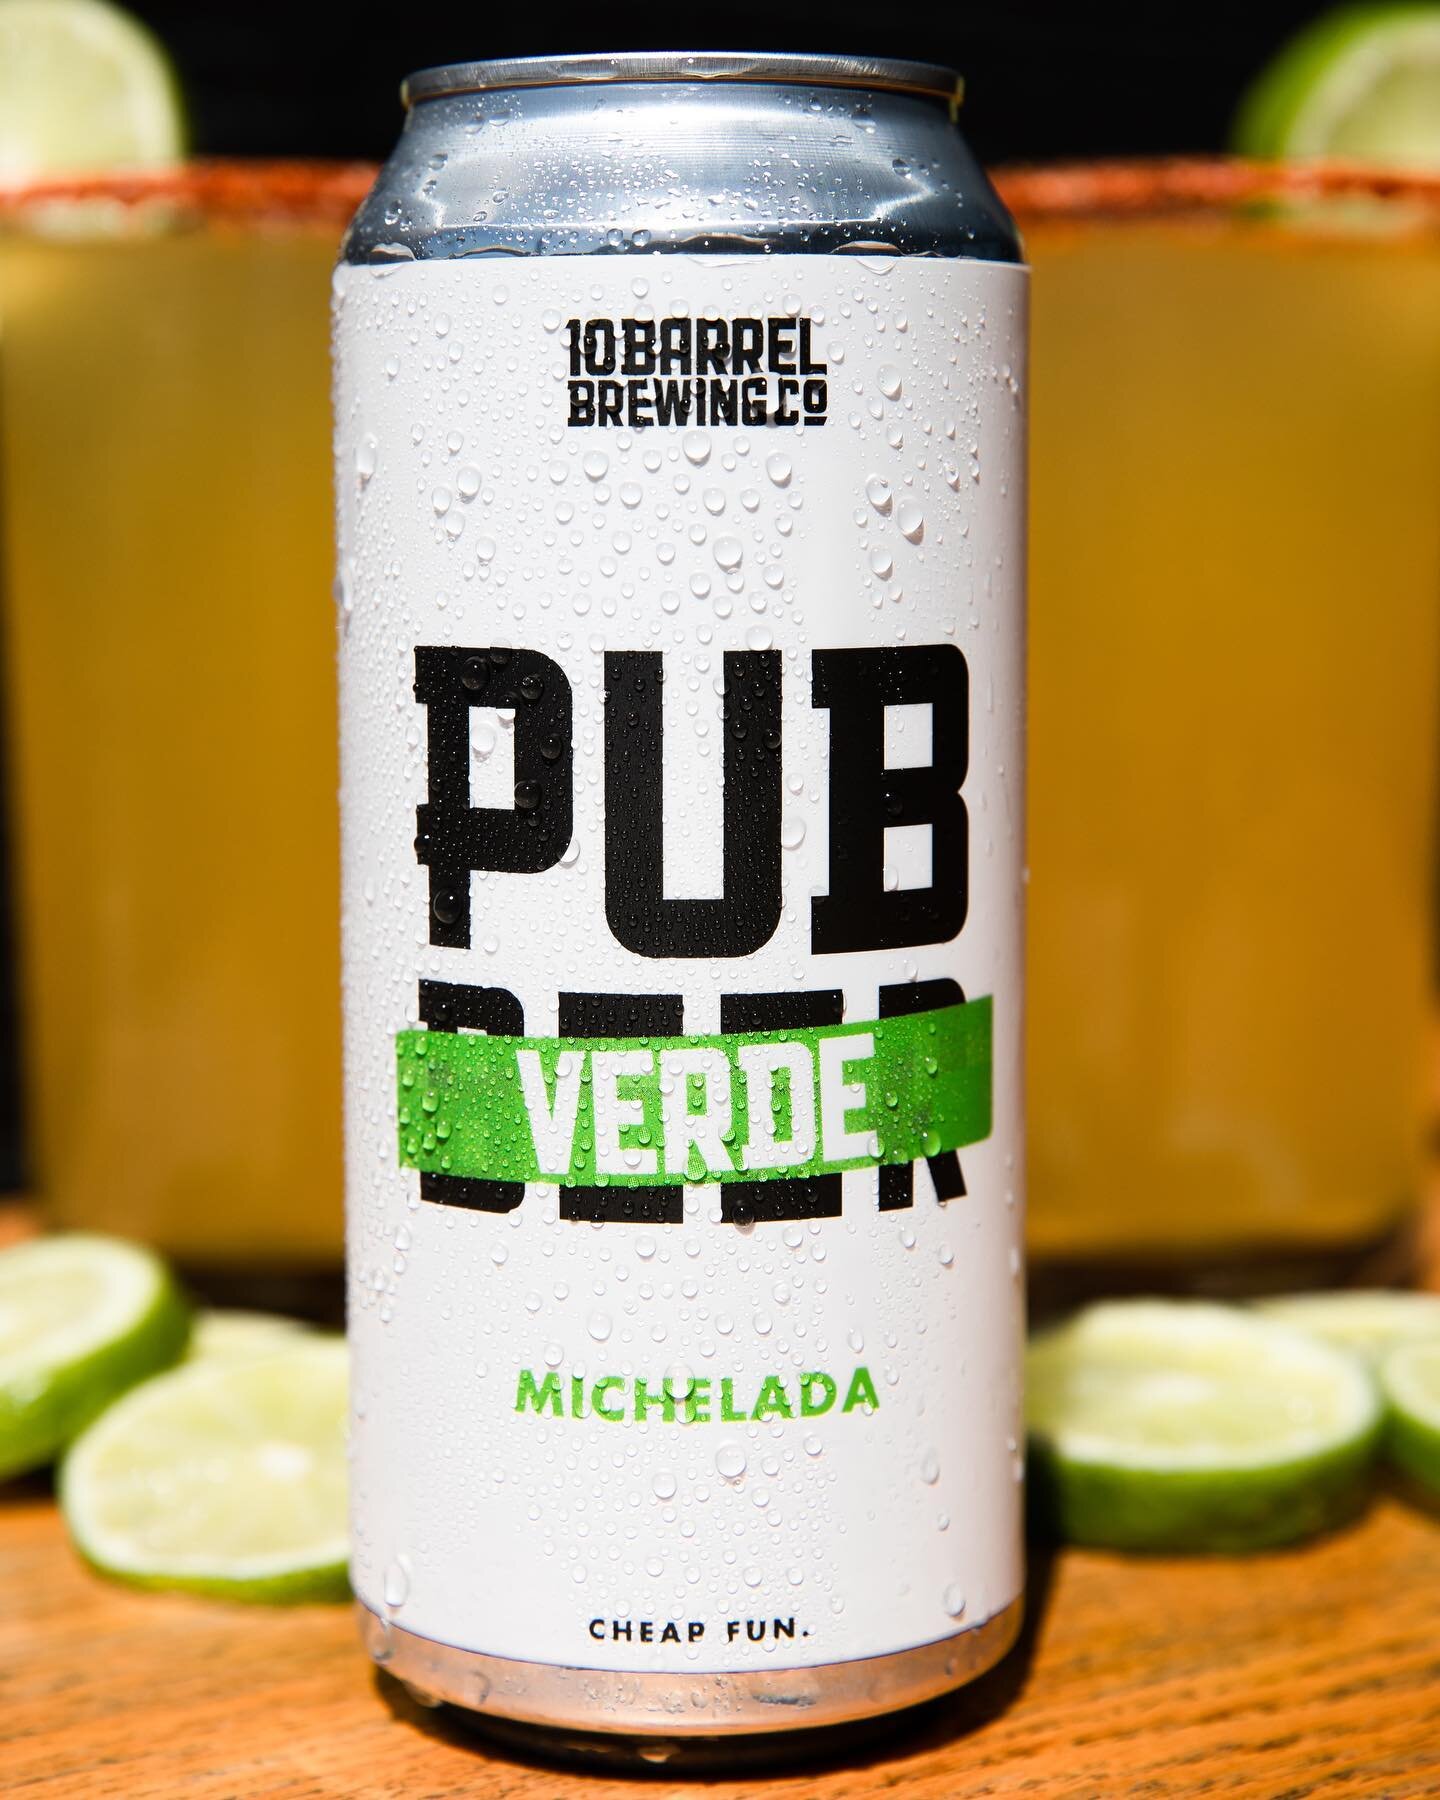 Meet your new hangover cure/ favorite beer variation 🍻 Just in time for Cinco de Mayo! 

A green Chelada with Pub Beer and house made mix of: tomatillo, lime, cilantro, green Cholula, a touch of salt and Serrano juice. 

Available at both of our ben